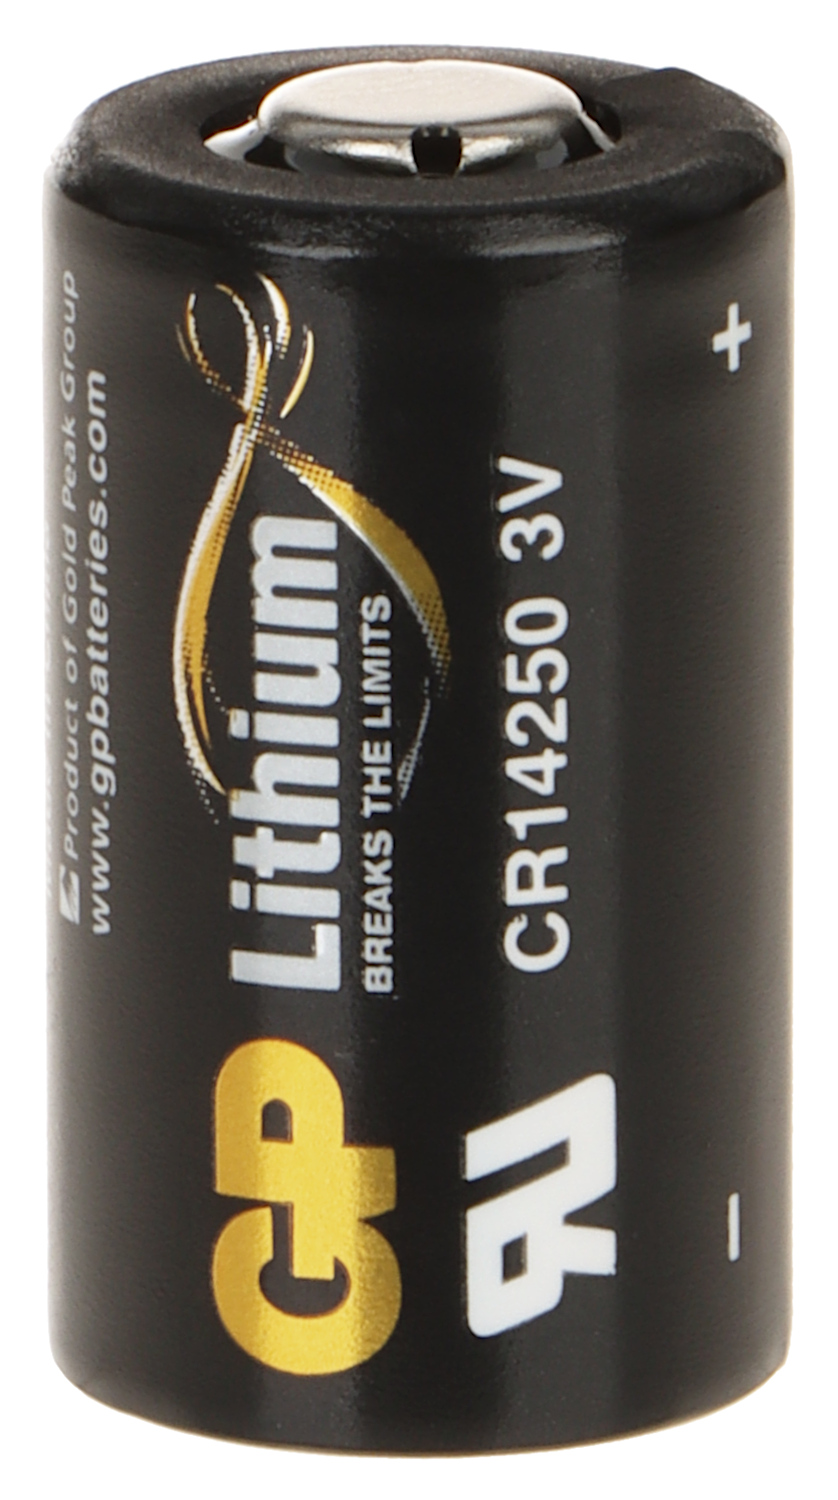 LITHIUM BATTERY BAT-CR14250 3 V CR14250 GP - Lithium and Other Batteries -  Delta